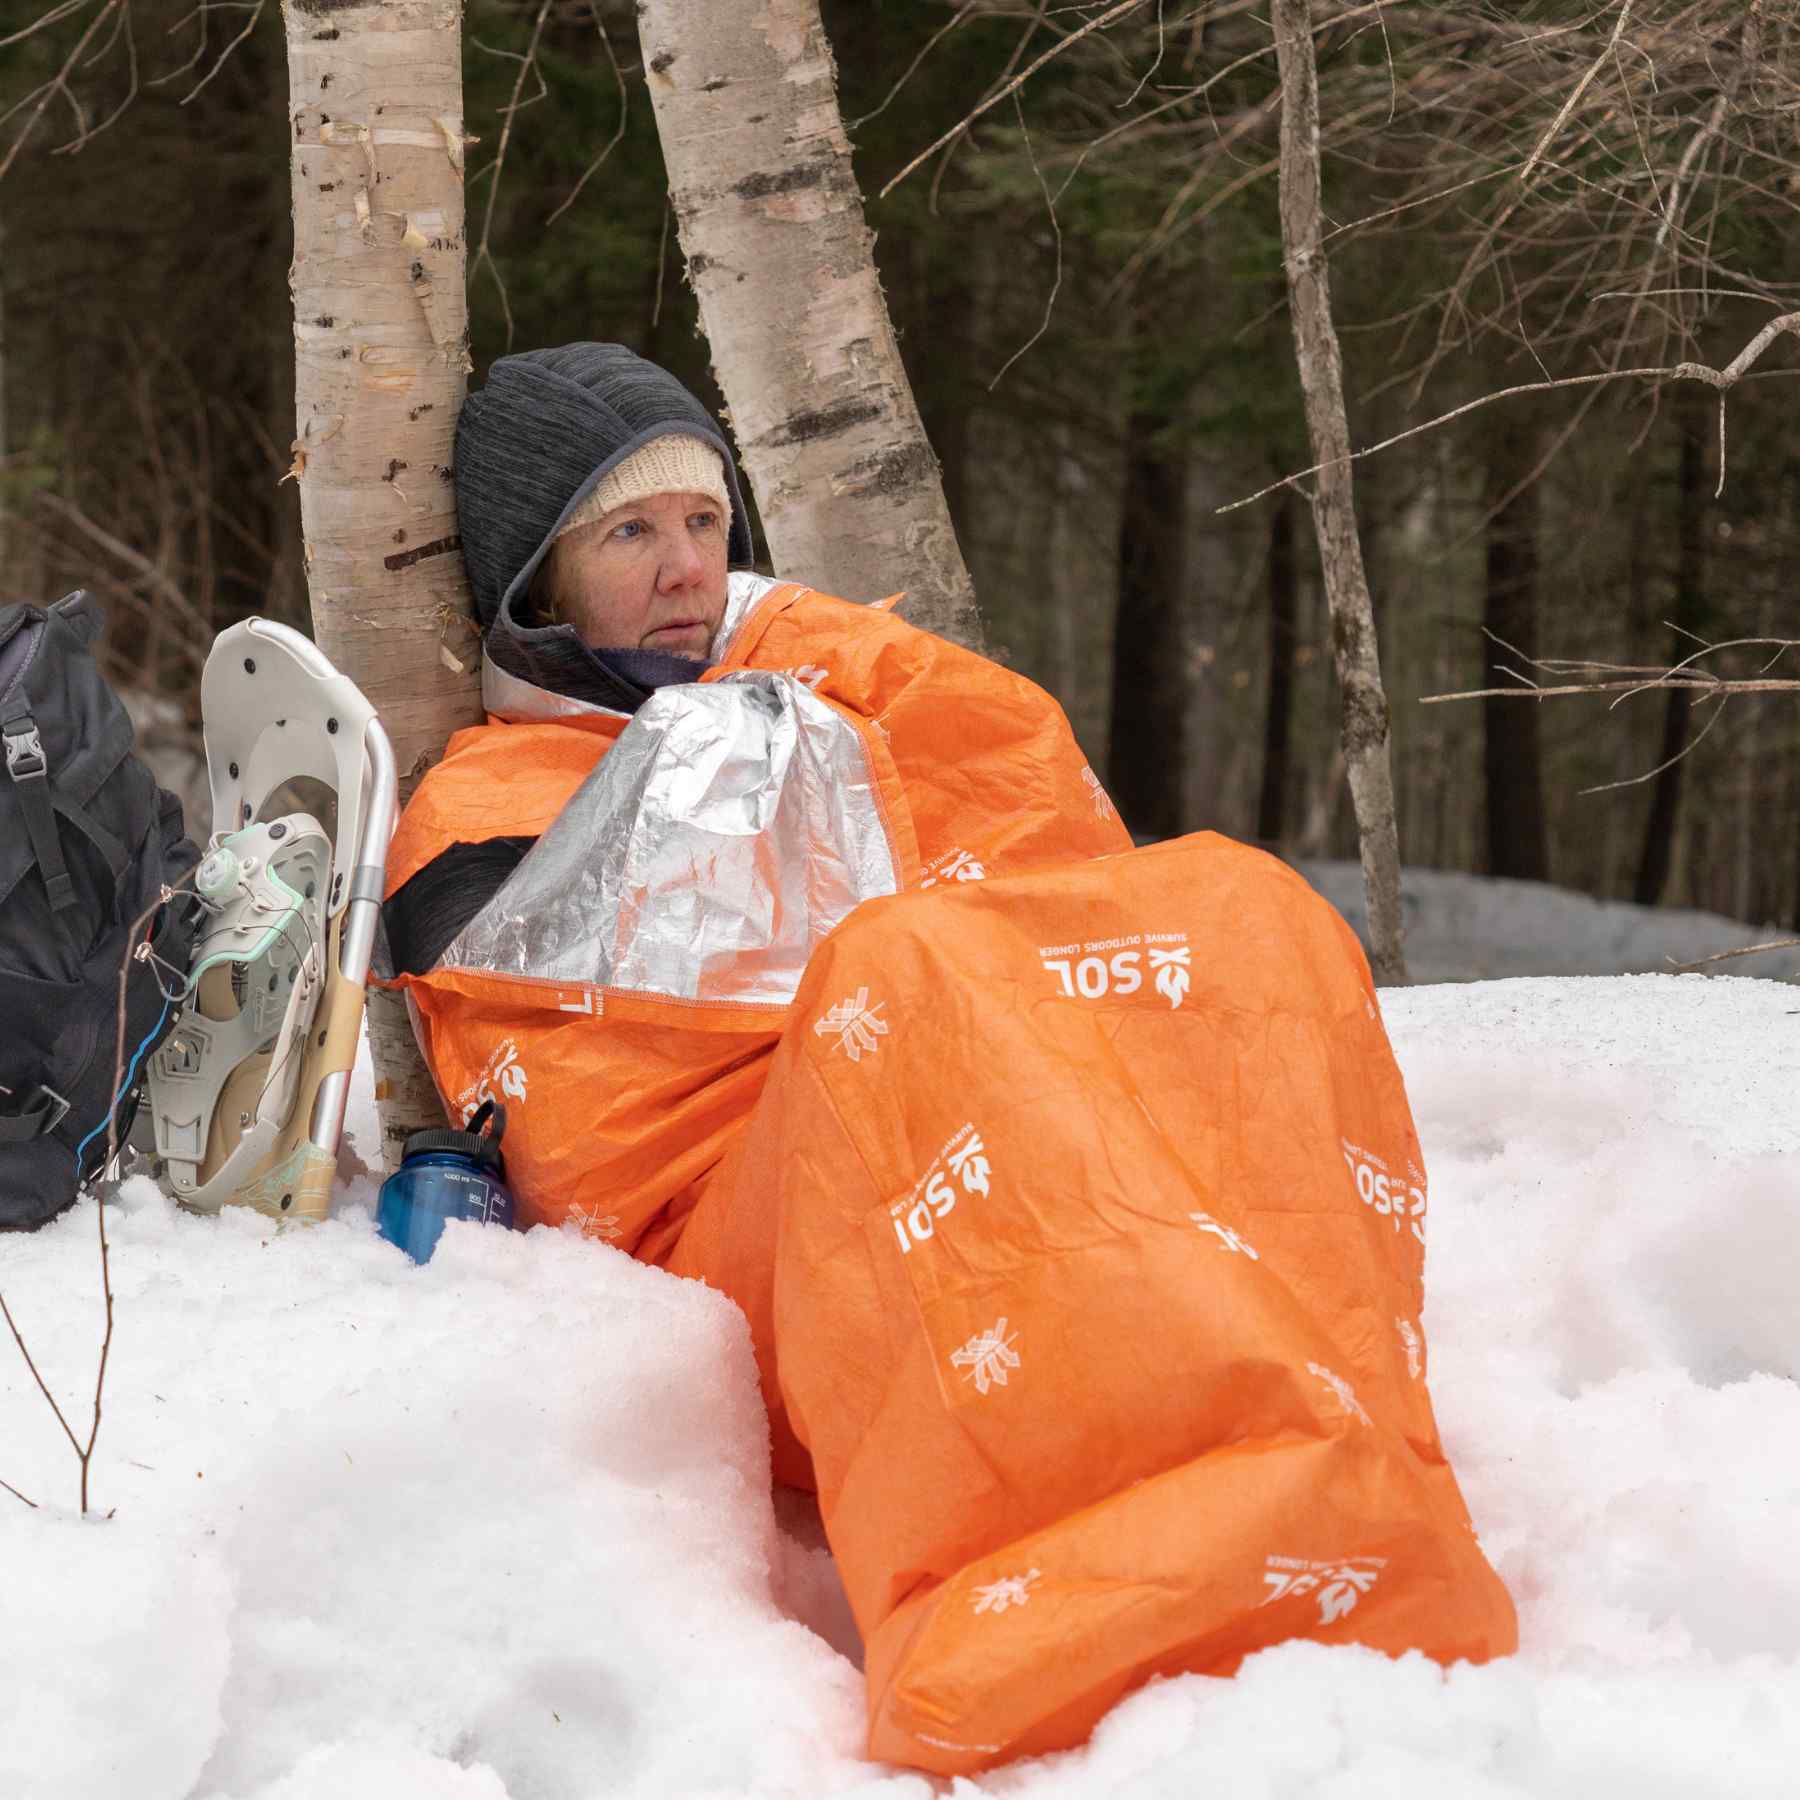 Escape Lite Bivvy woman in bivvy leaning on trees in snow with snowshoes next to her